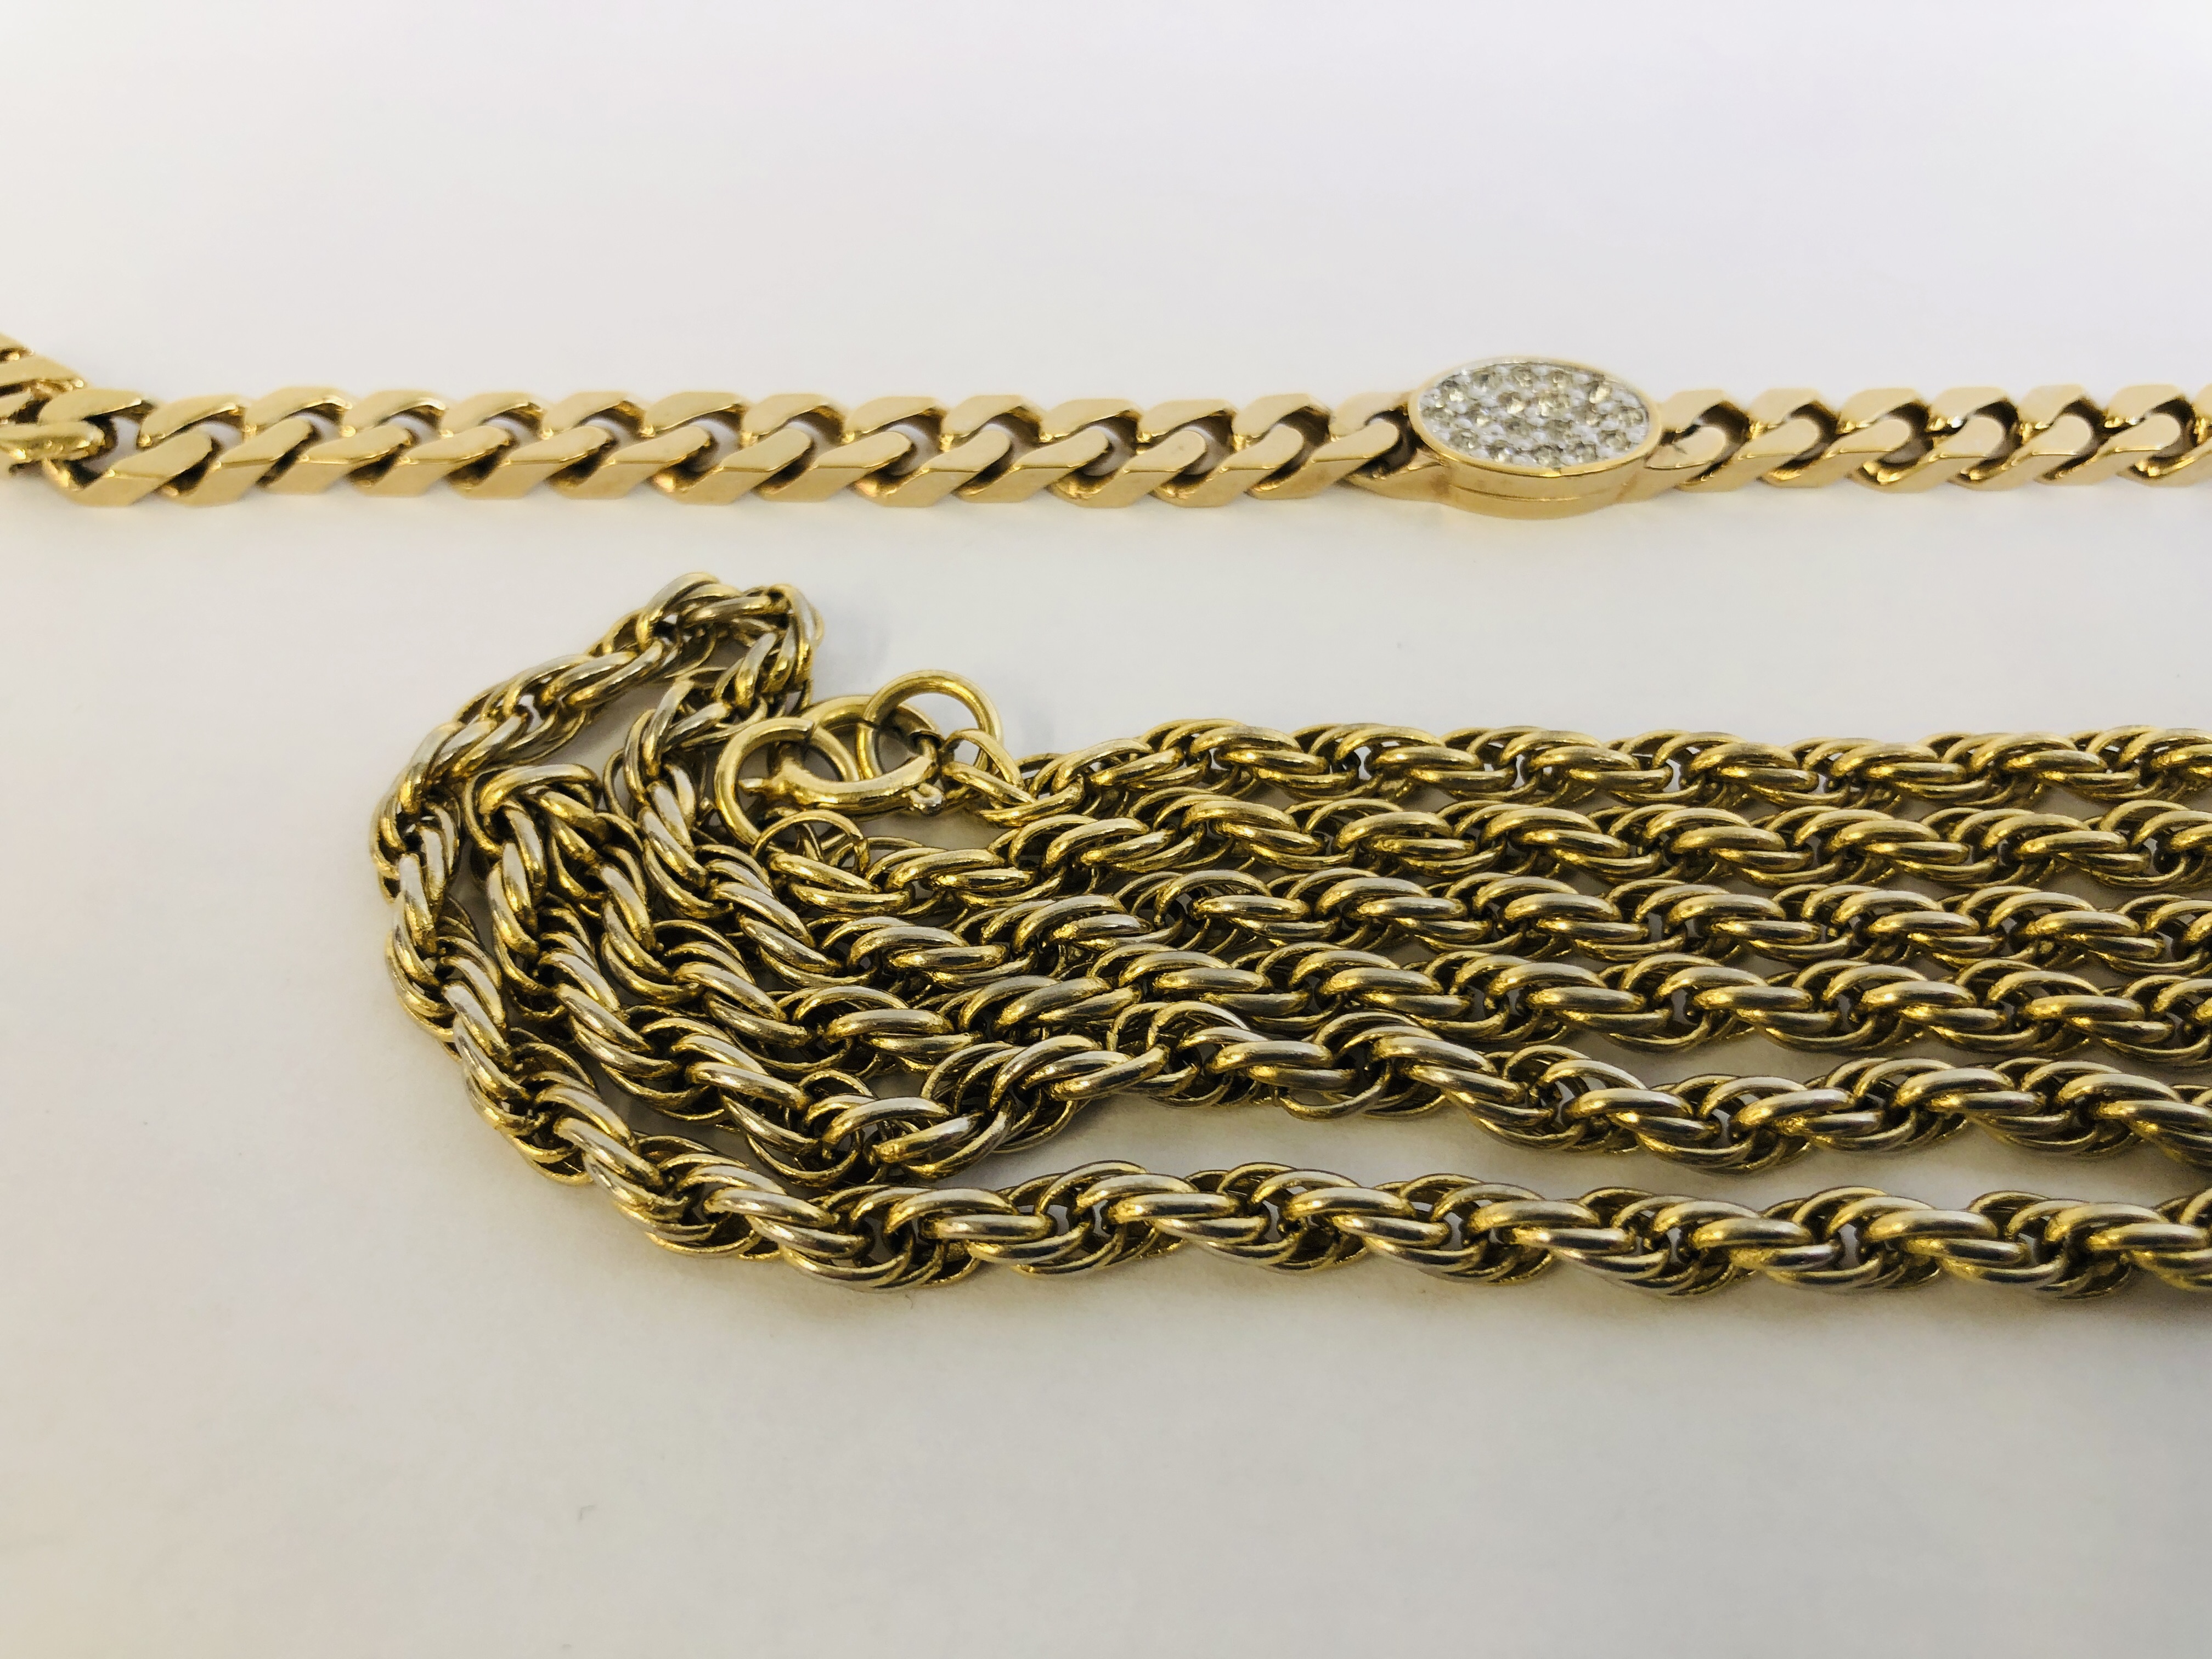 A GOLD TONE COSTUME BRACELET MARKED "PANETTA" ALONG WITH AN UNMARKED ROPE TWIST NECKLACE. - Image 2 of 13